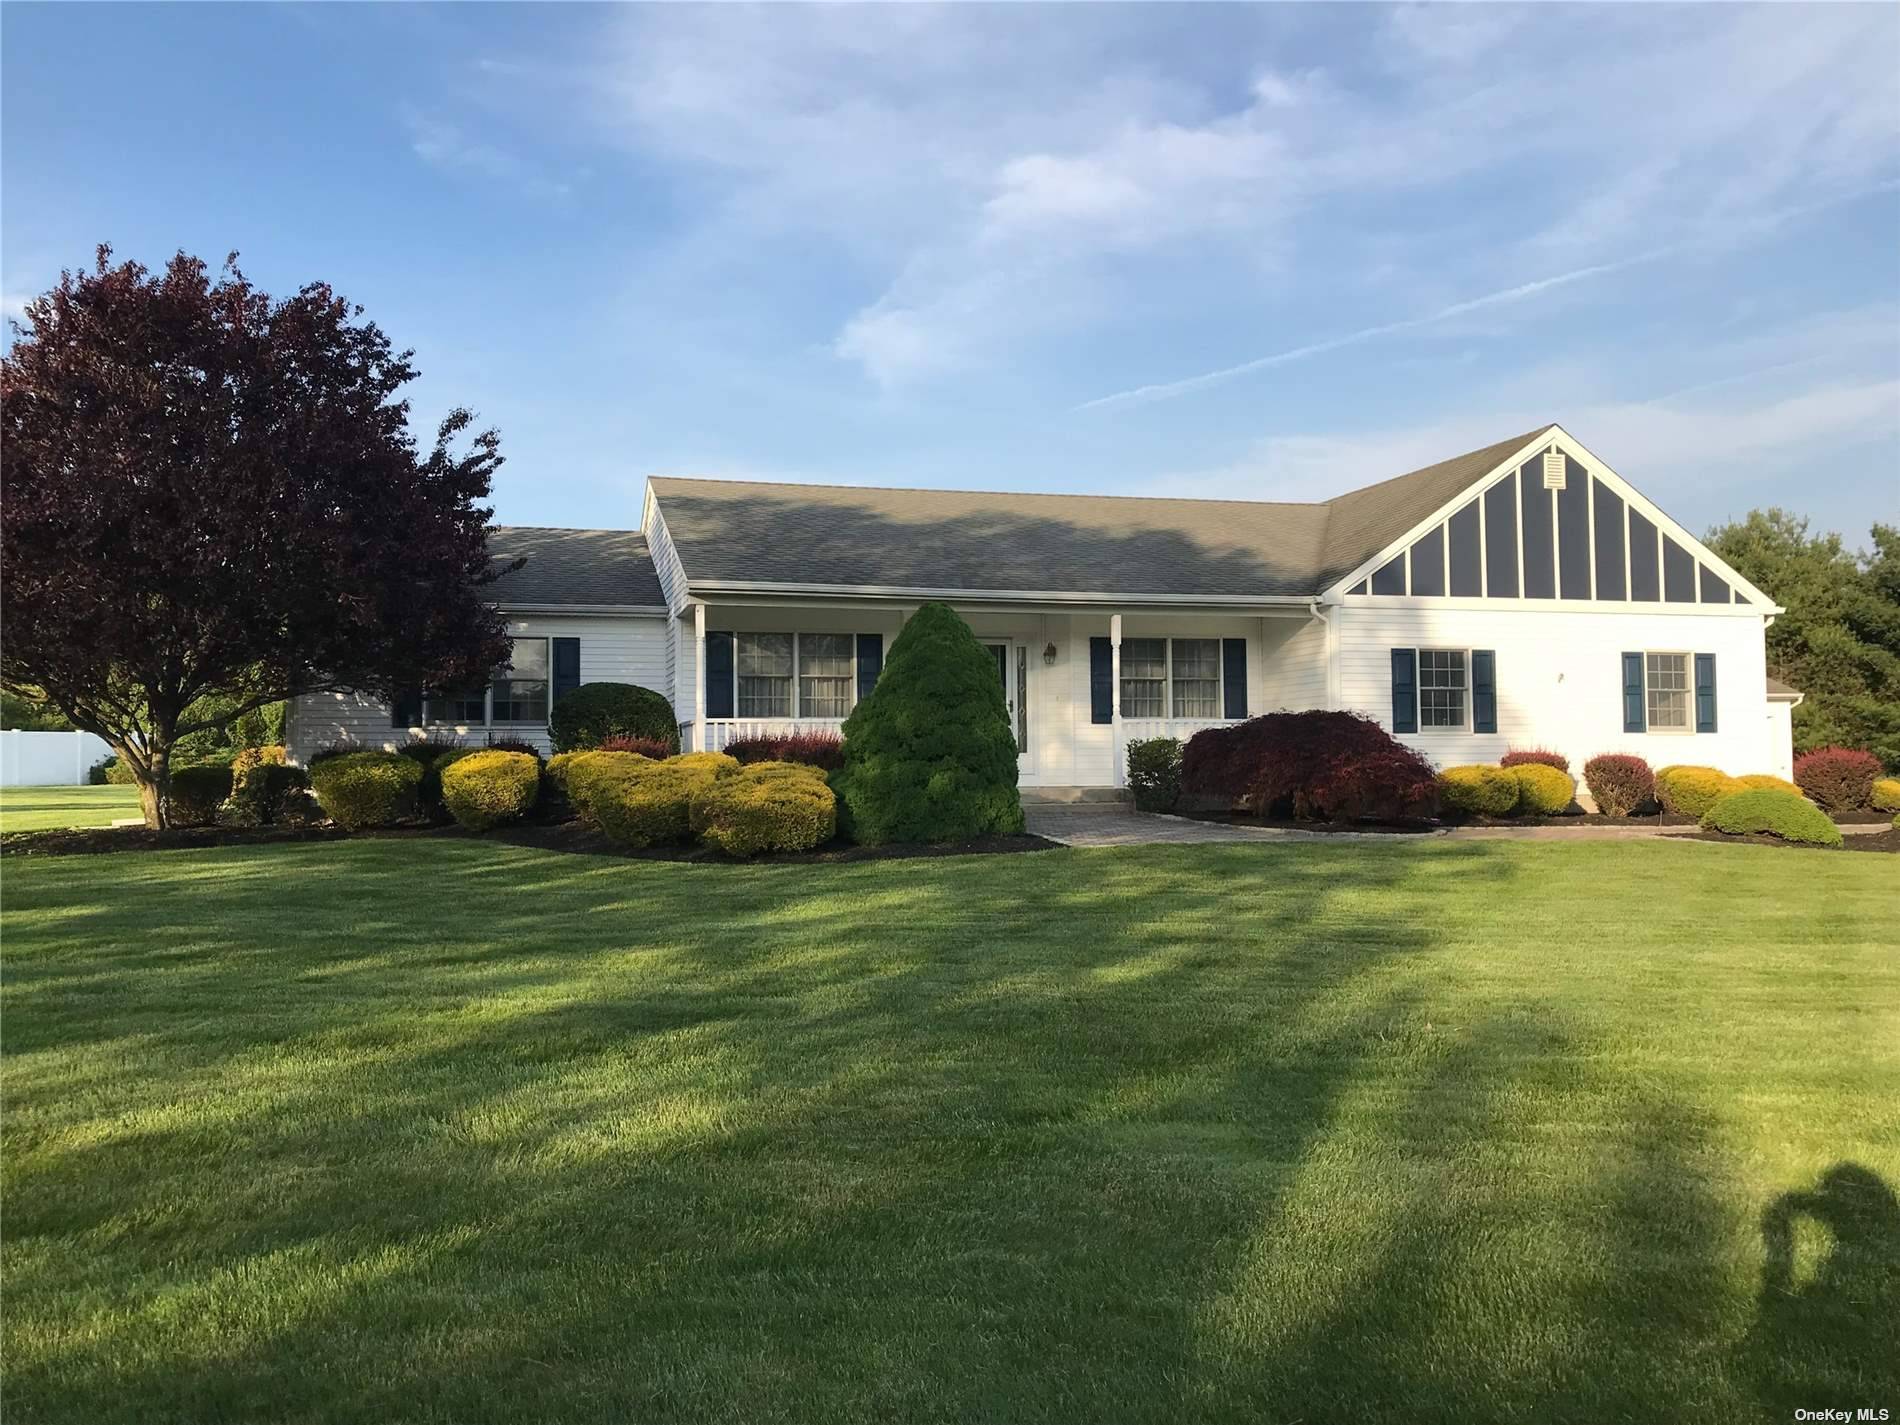 This meticulously maintained and manicured property is located in the bucolic North Shore hamlet of Wading River, NY.